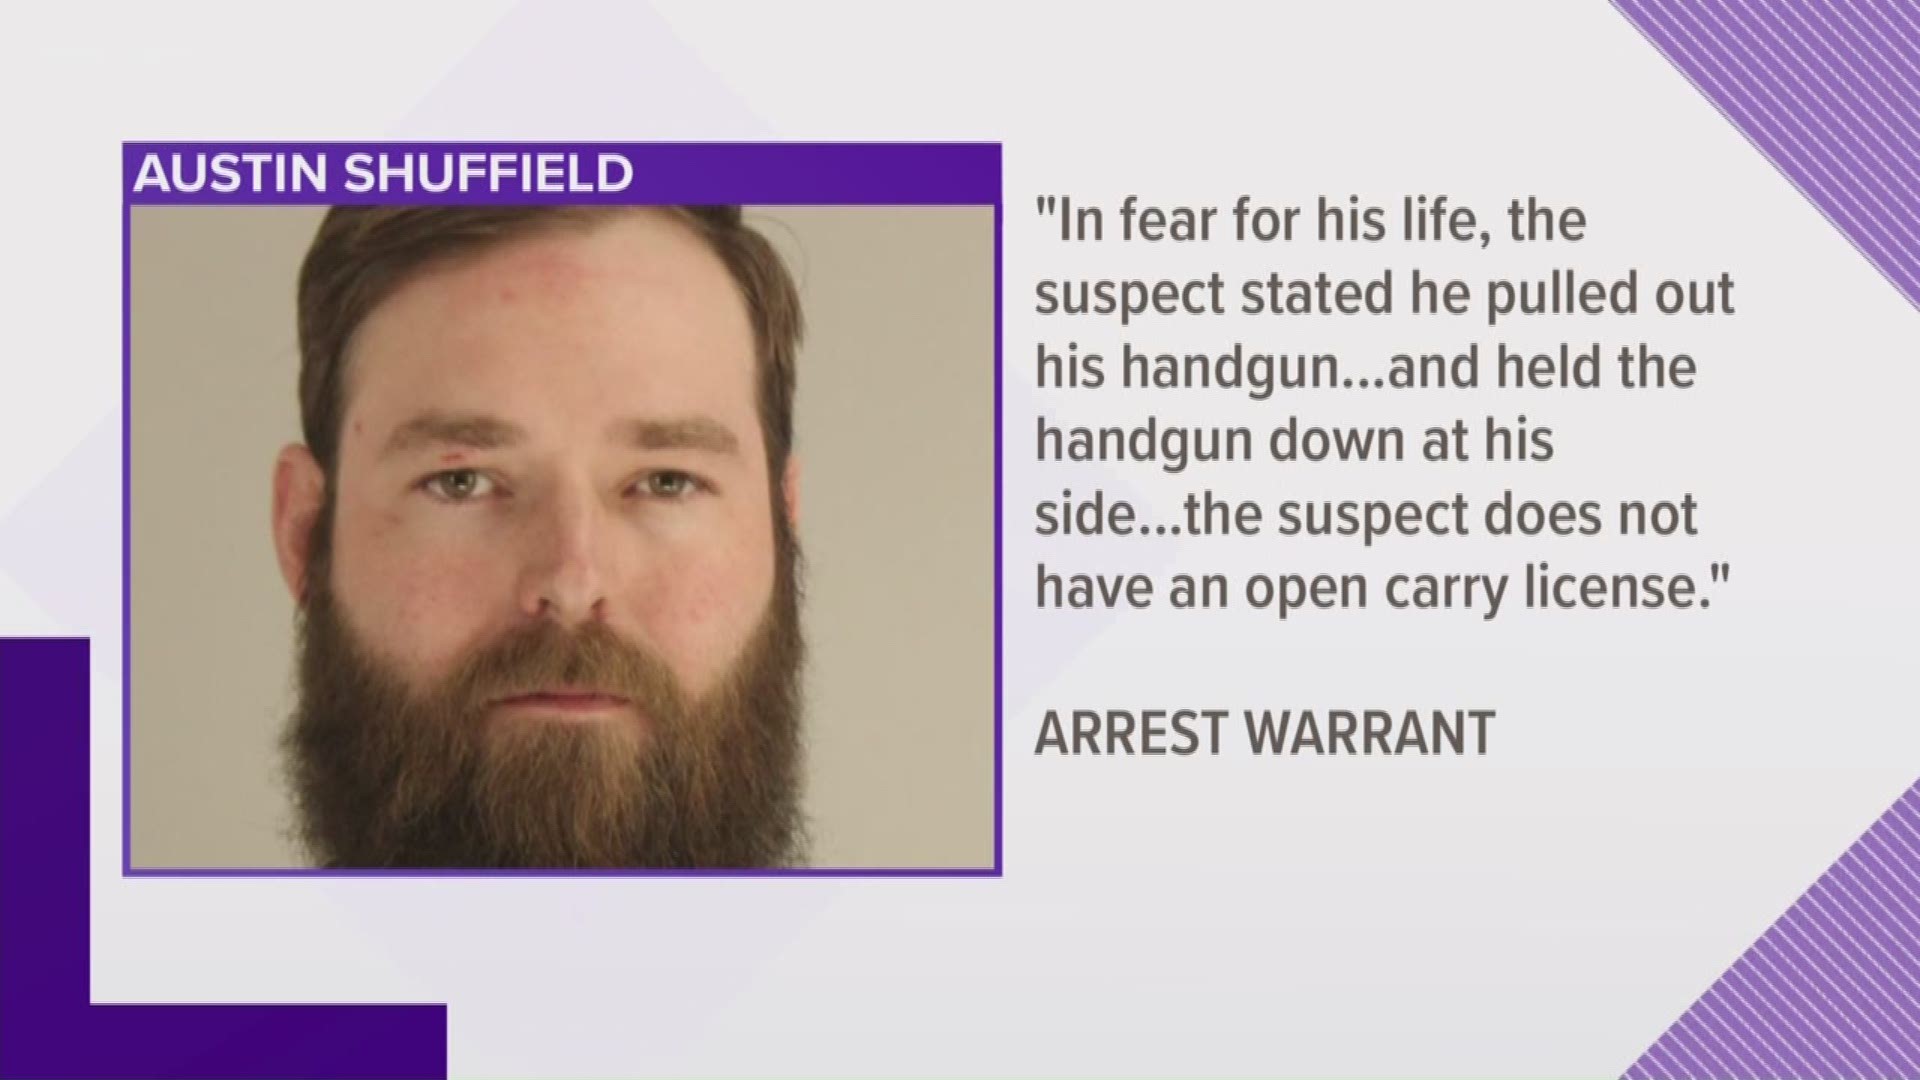 According to a new arrest warrant, Shuffield said he feared for his life during the incident.